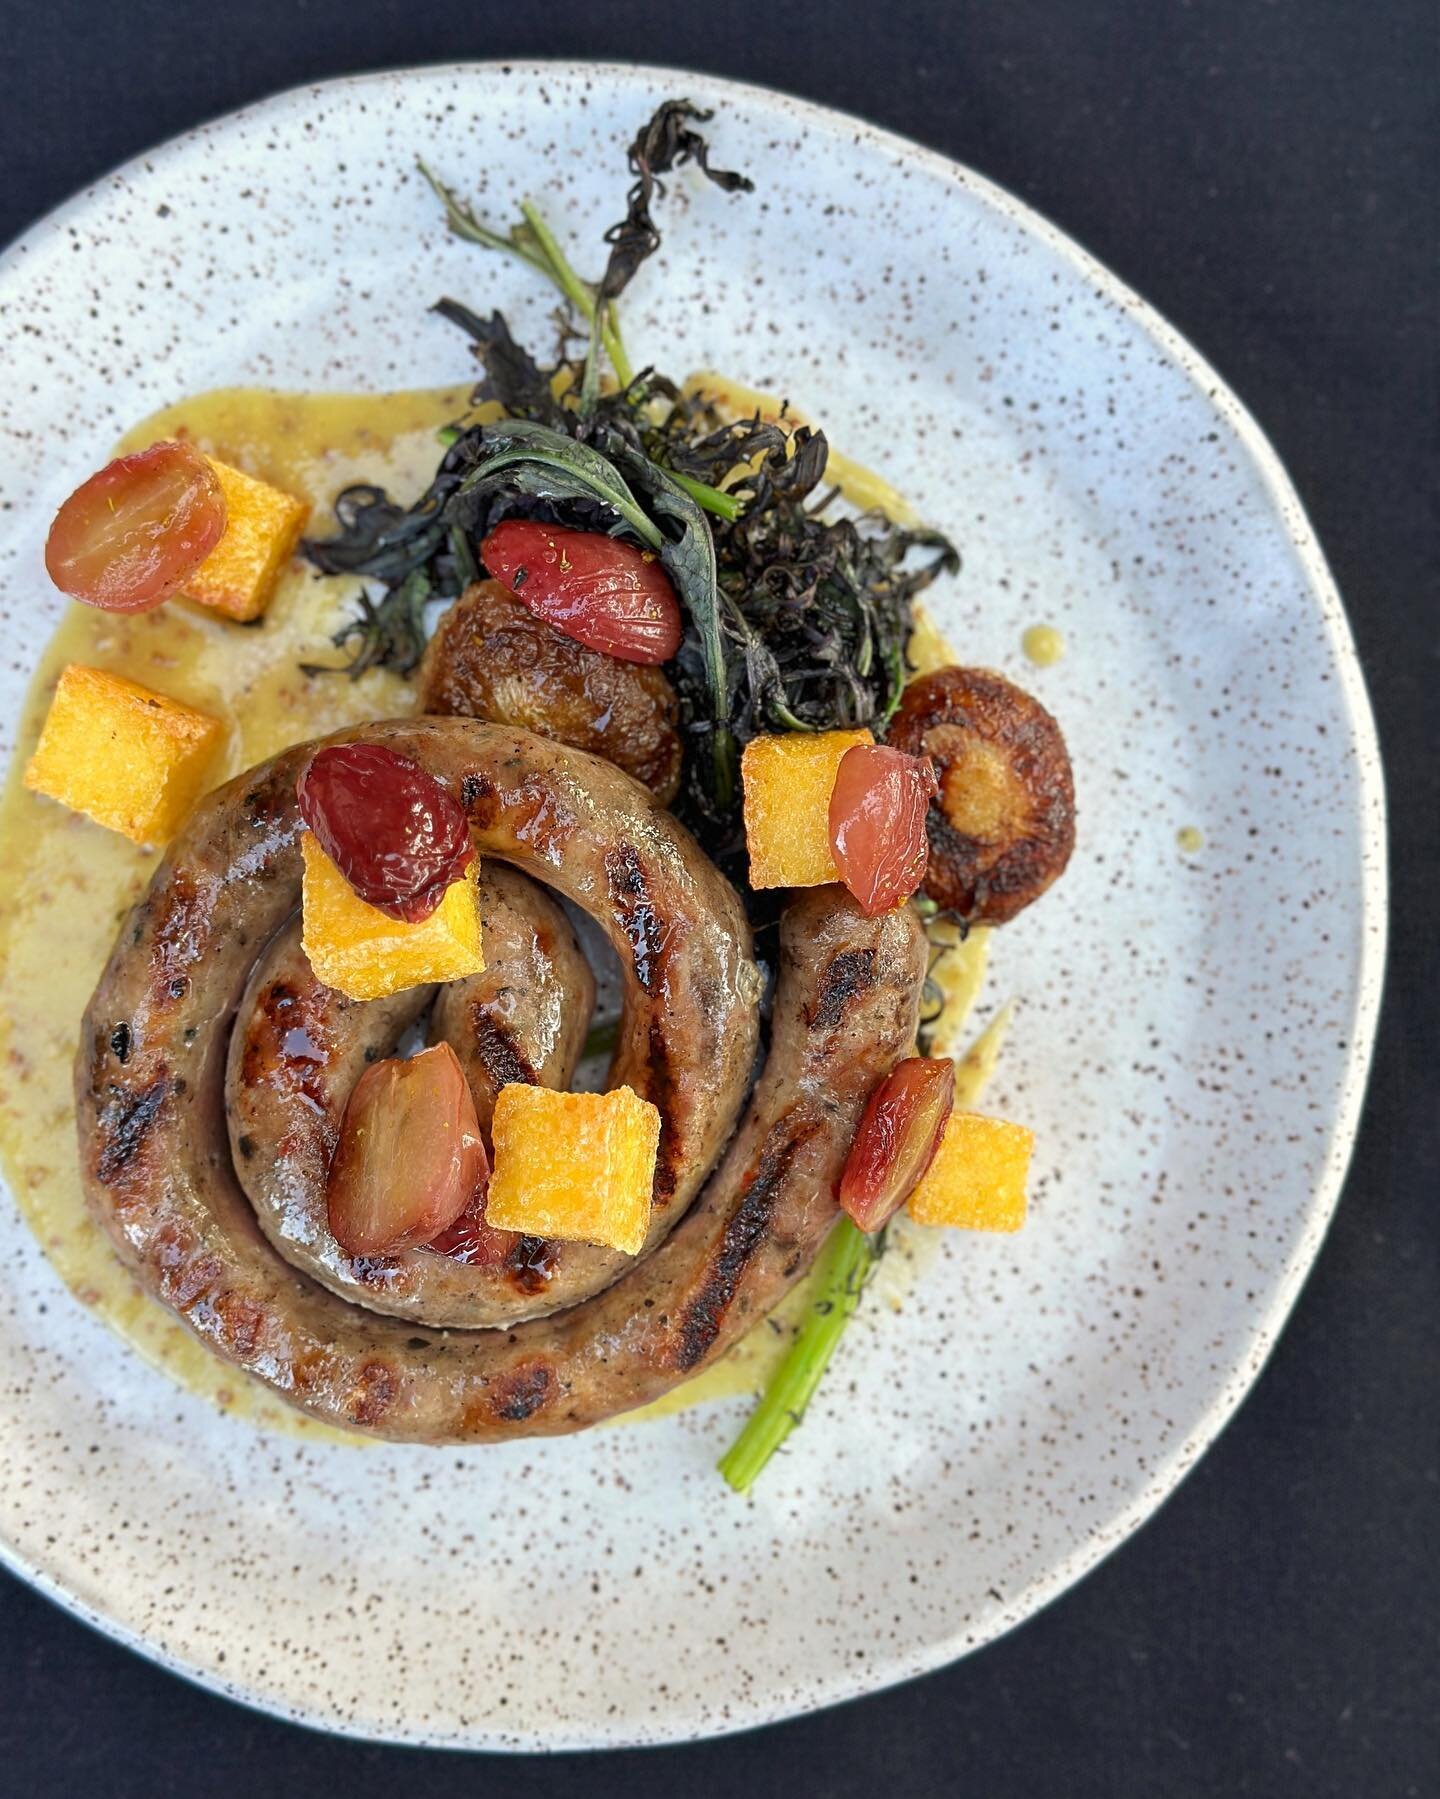 we&rsquo;re shaking up our menu with the seasons 🫨 NEW: iberico sausage with roasted grapes, crispy polenta &amp; grain mustard vinaigrette 🤌
&bull;
#bostonfoodies #bostoneats #bostoneater #bostonfoodjournal #bostonfoodgram #bostonfoodieguide #bost